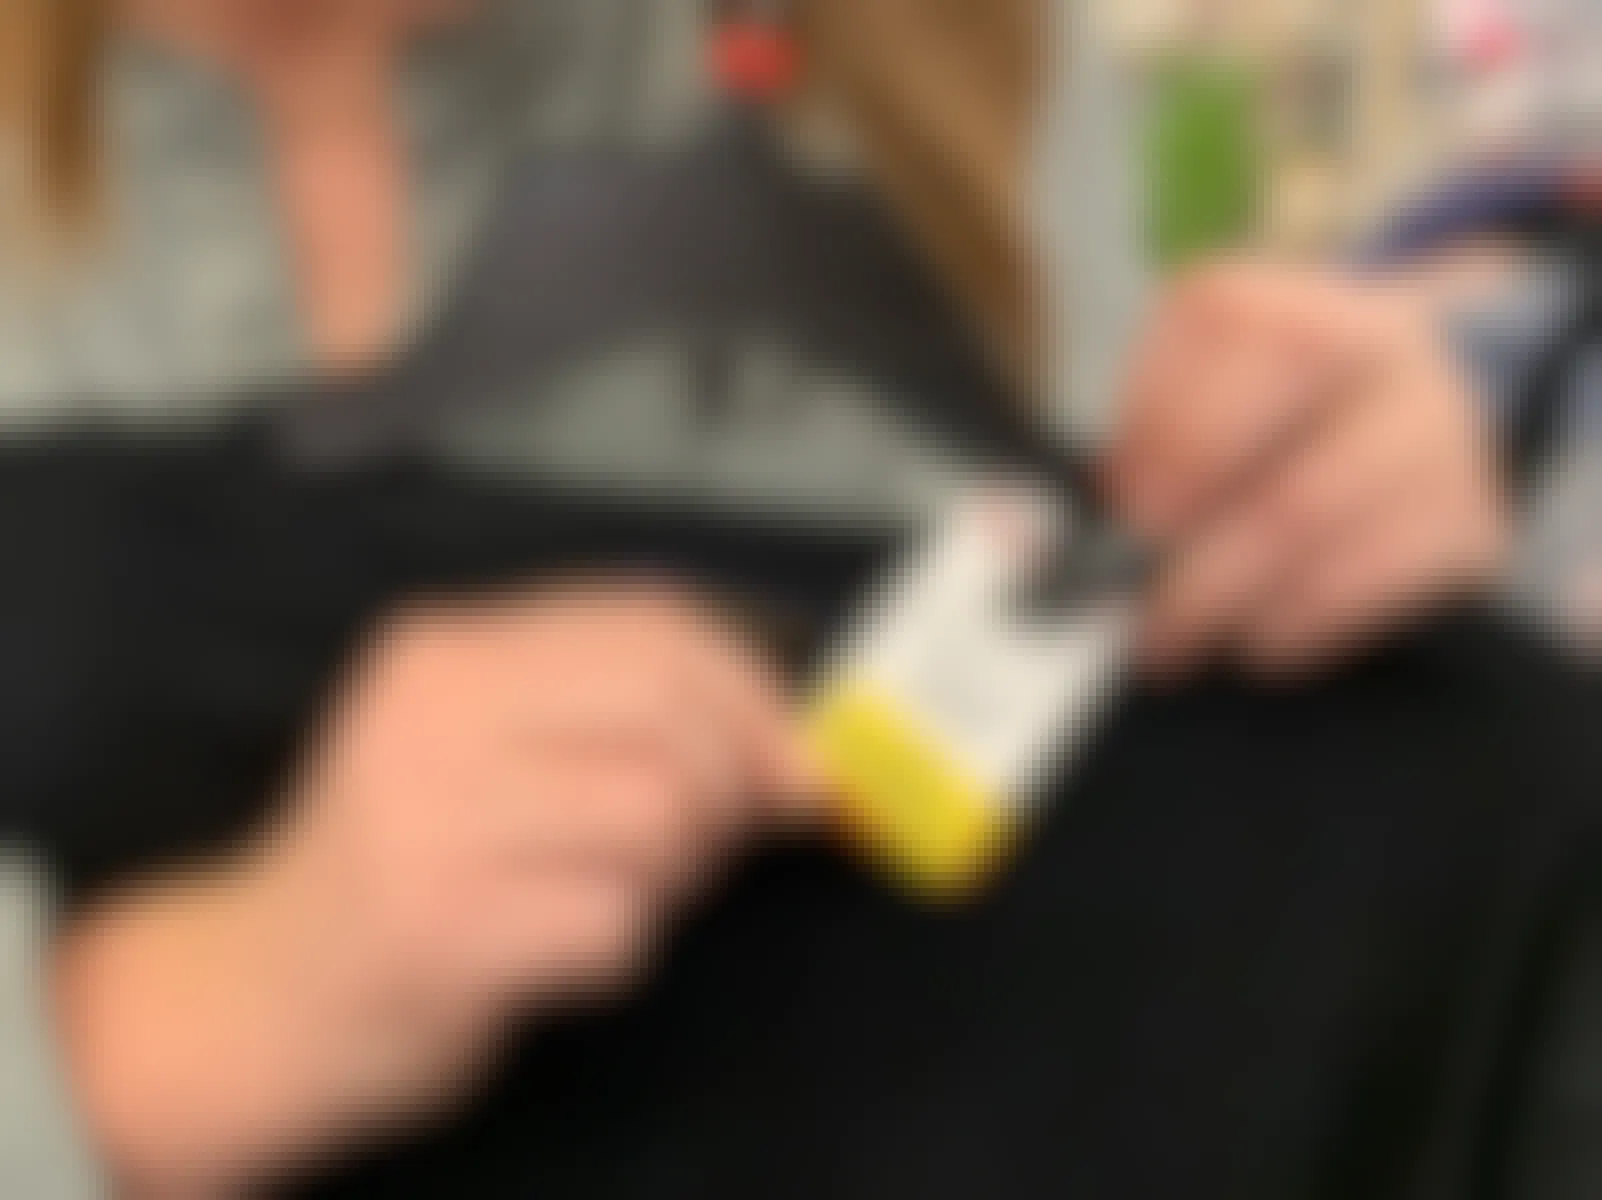 A price tag with a yellow clearance sticker on a mens sweater.